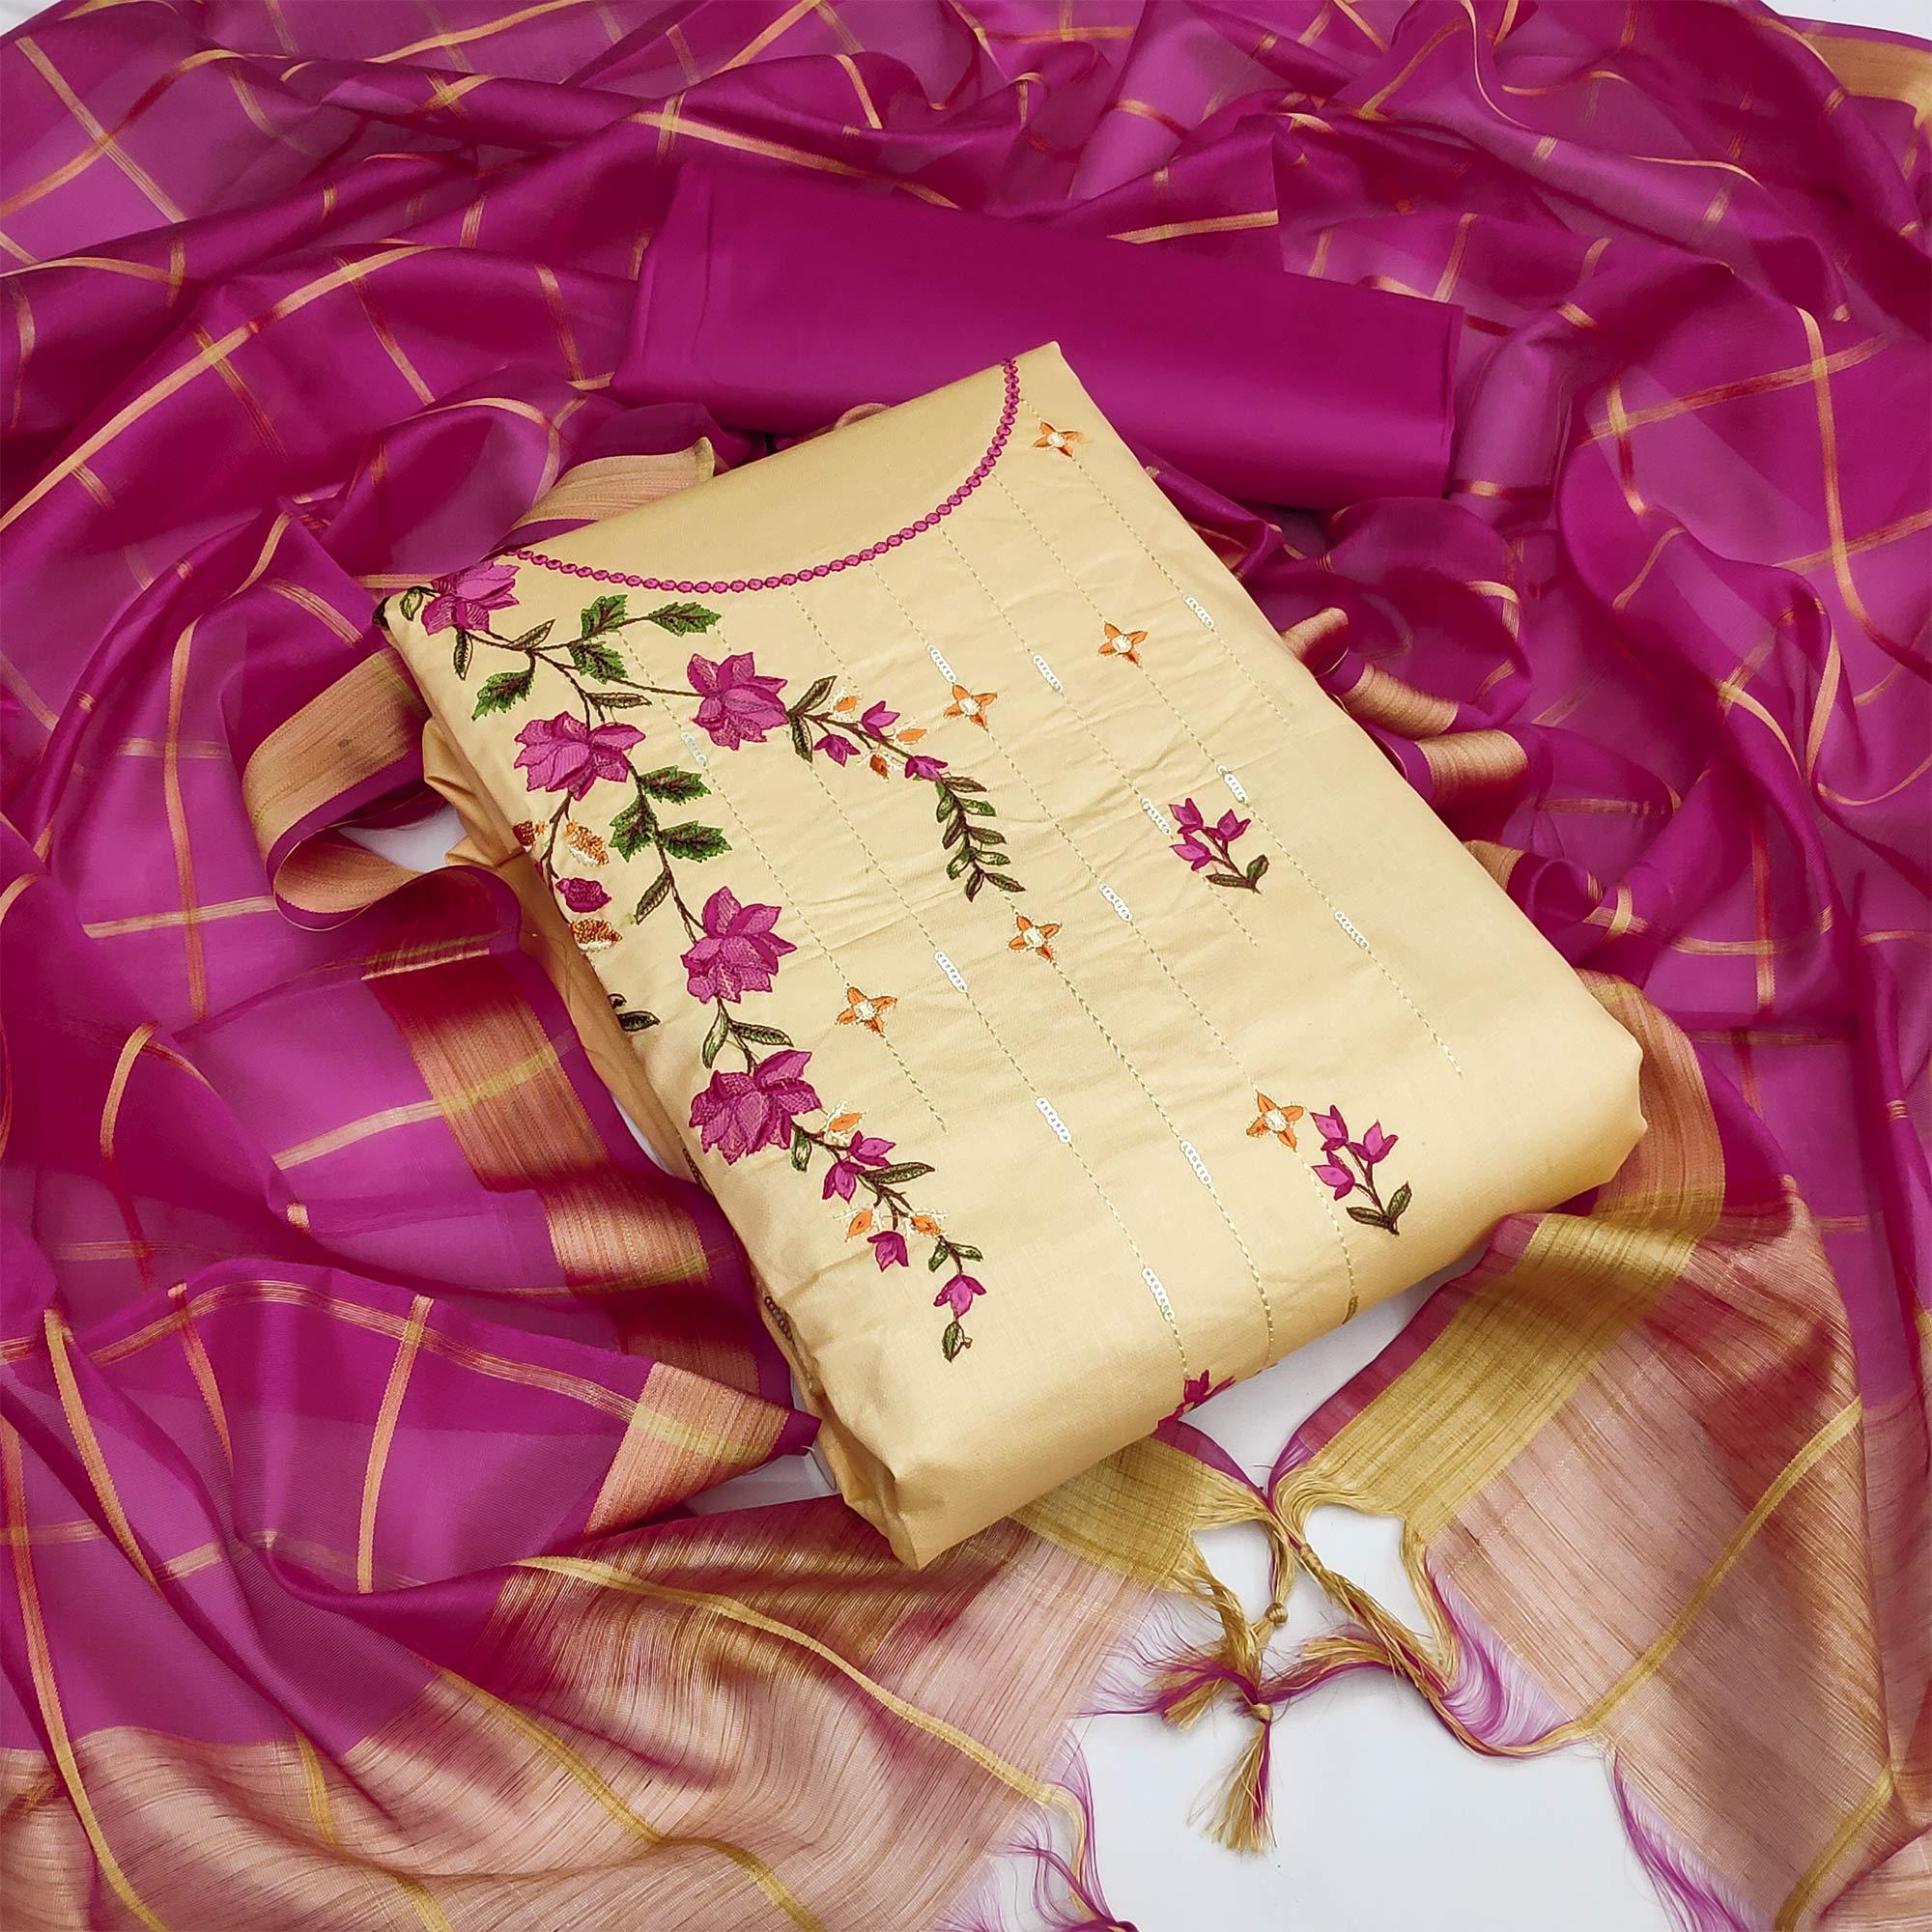 Chikoo Festive Wear Floral Embroidery With Sequence Cotton Dress Material - Peachmode